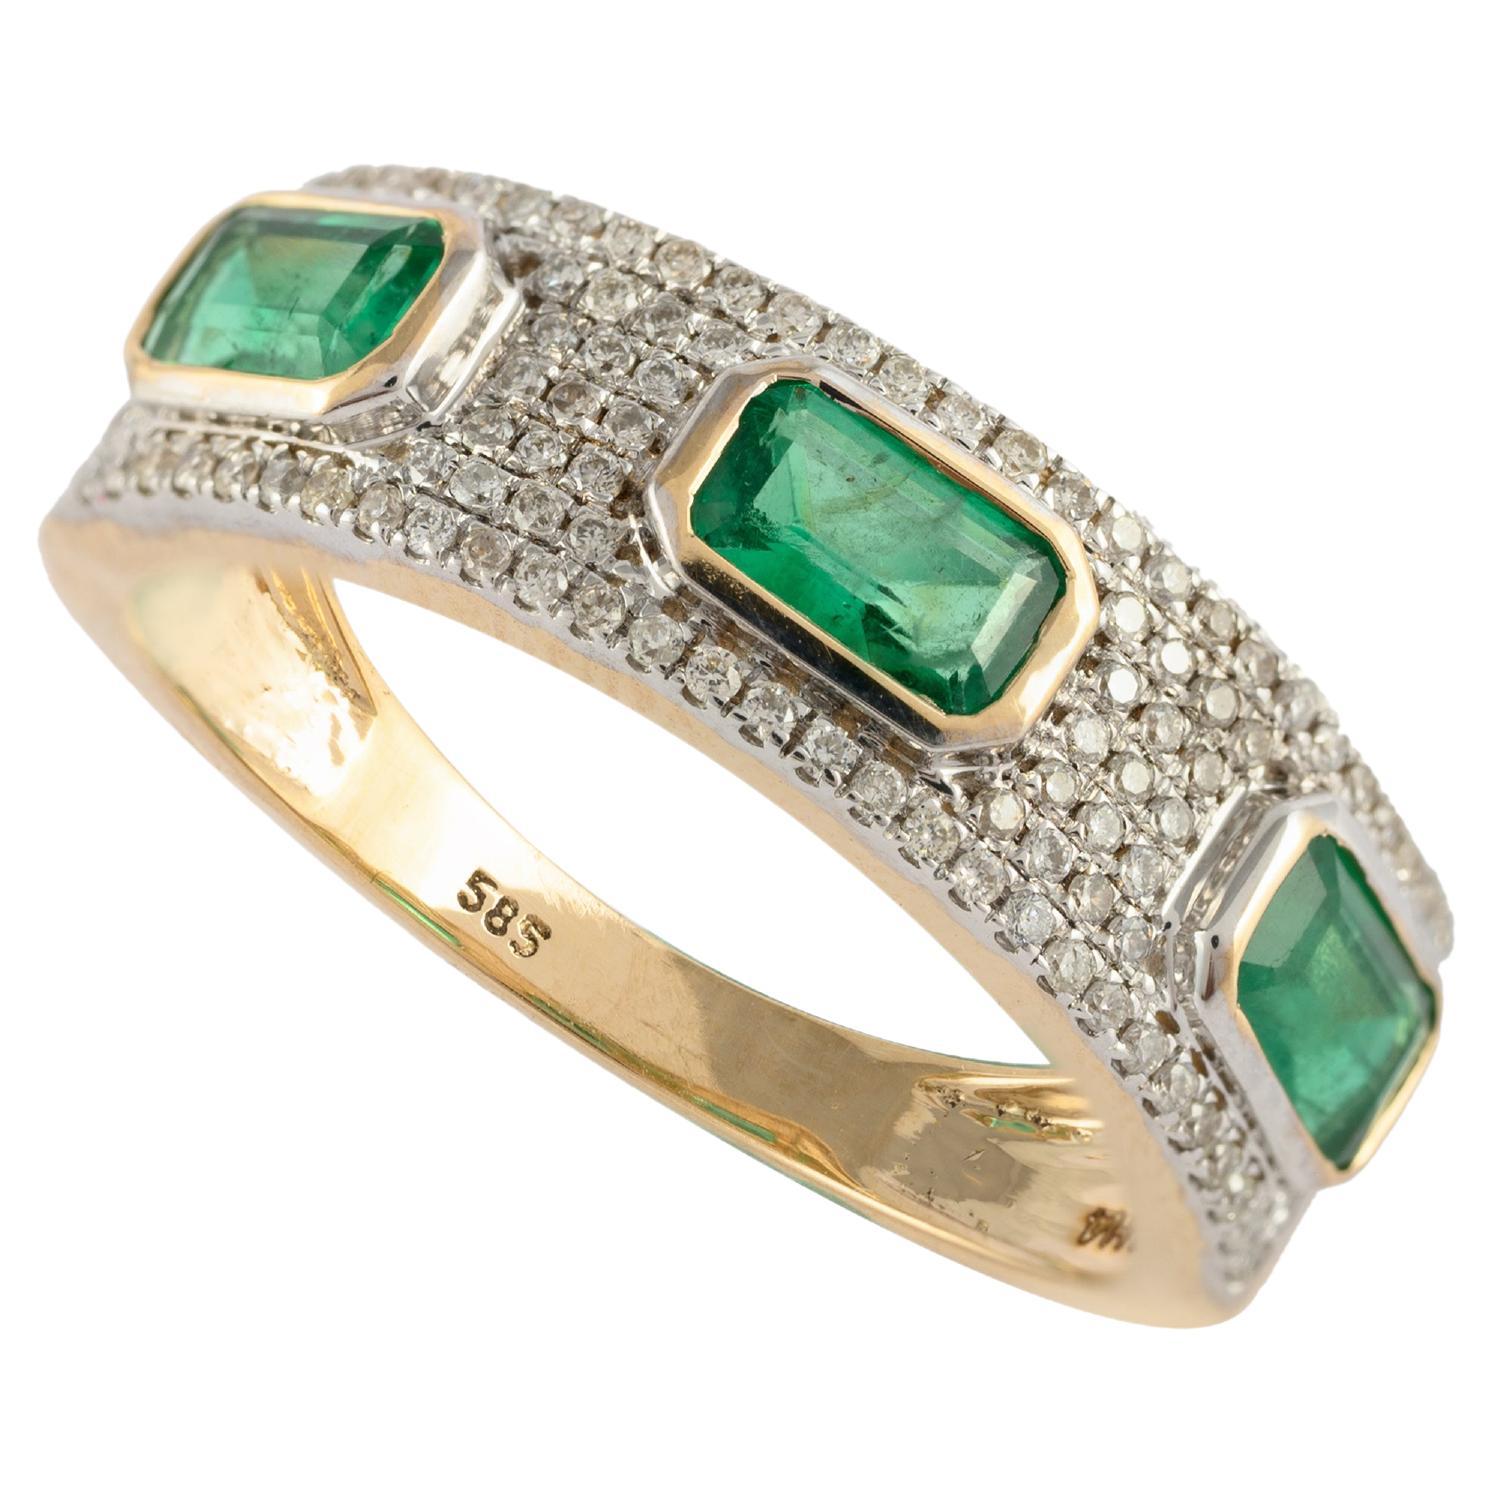 Impeccable Three Stone Emerald and Diamond Engagement Ring in 14k Yellow Gold